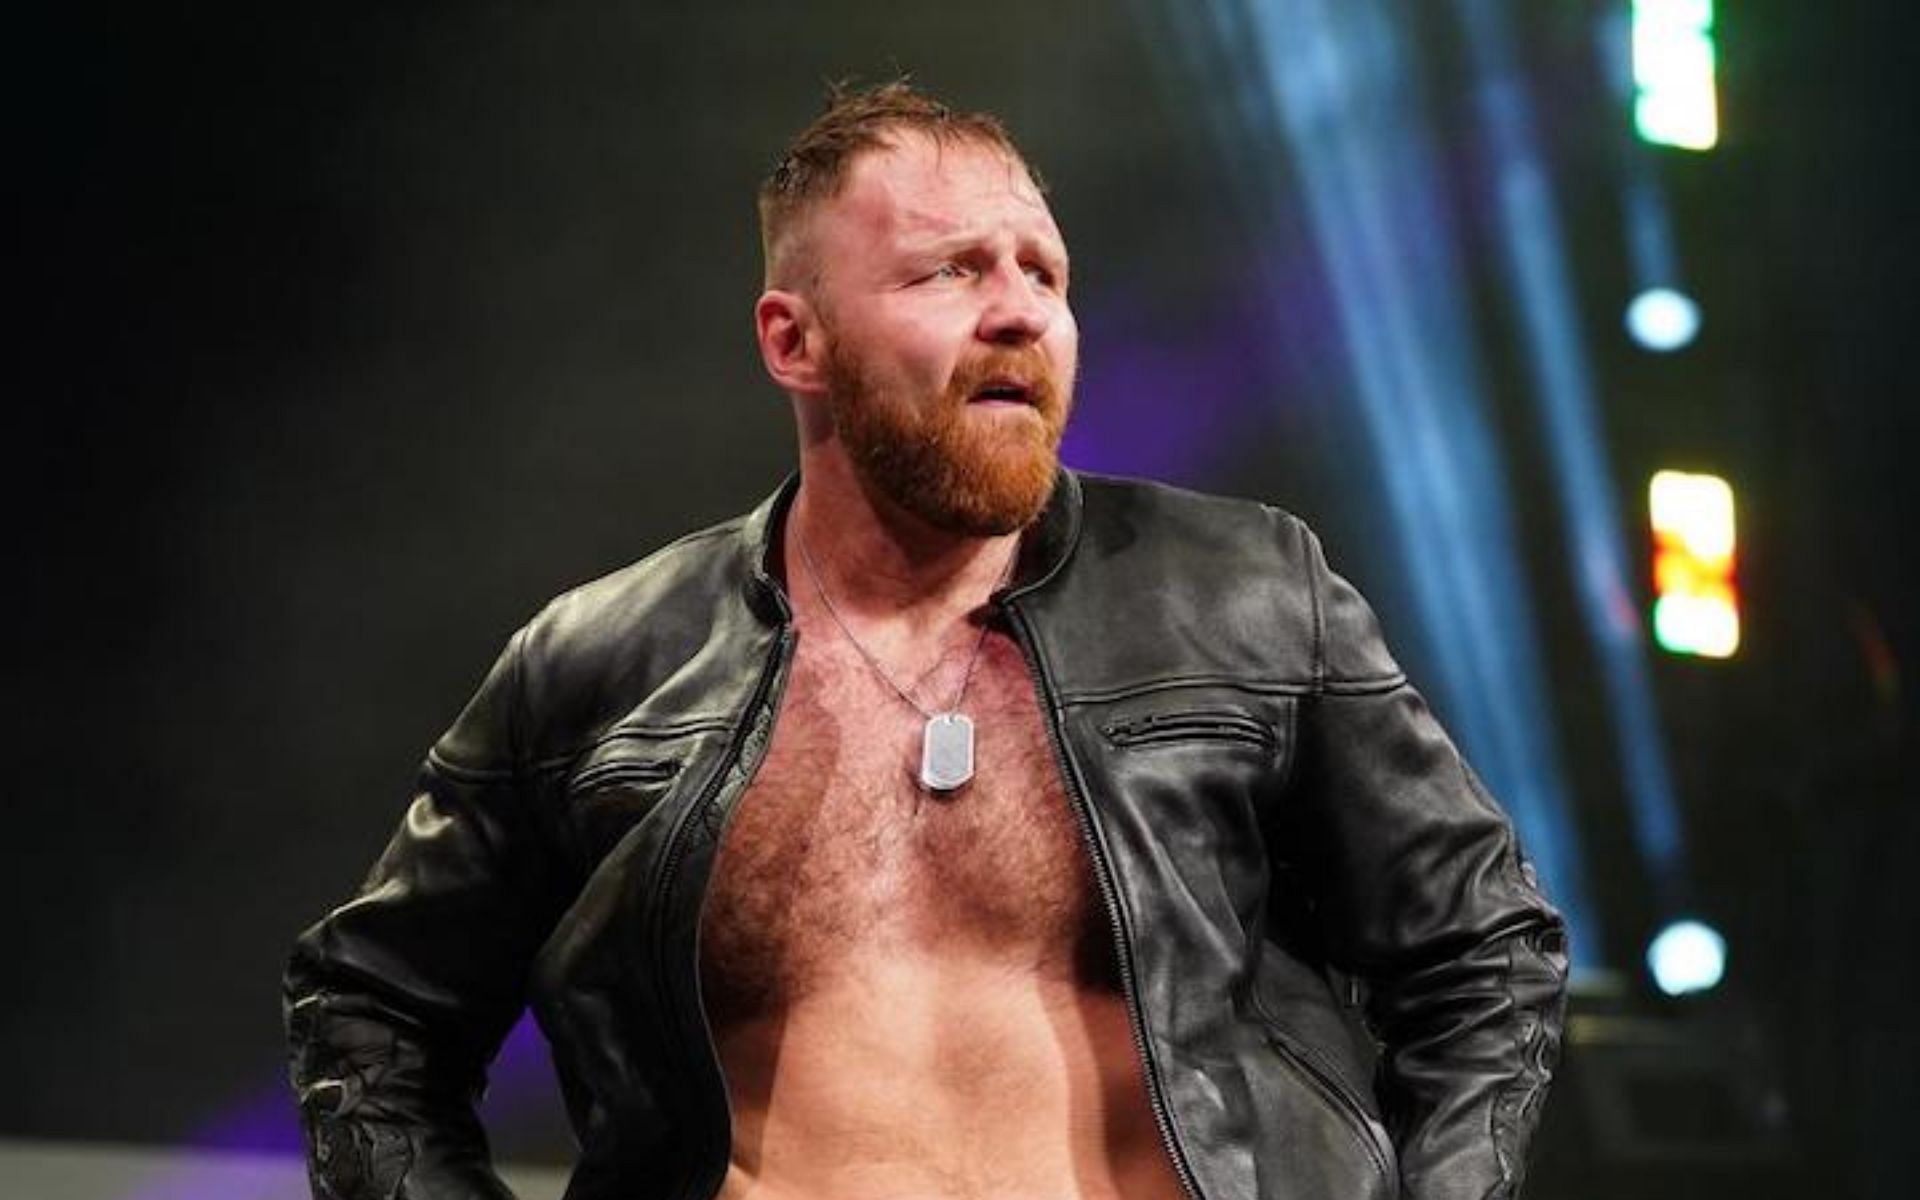 Jon Moxley is a three-time AEW World Champion